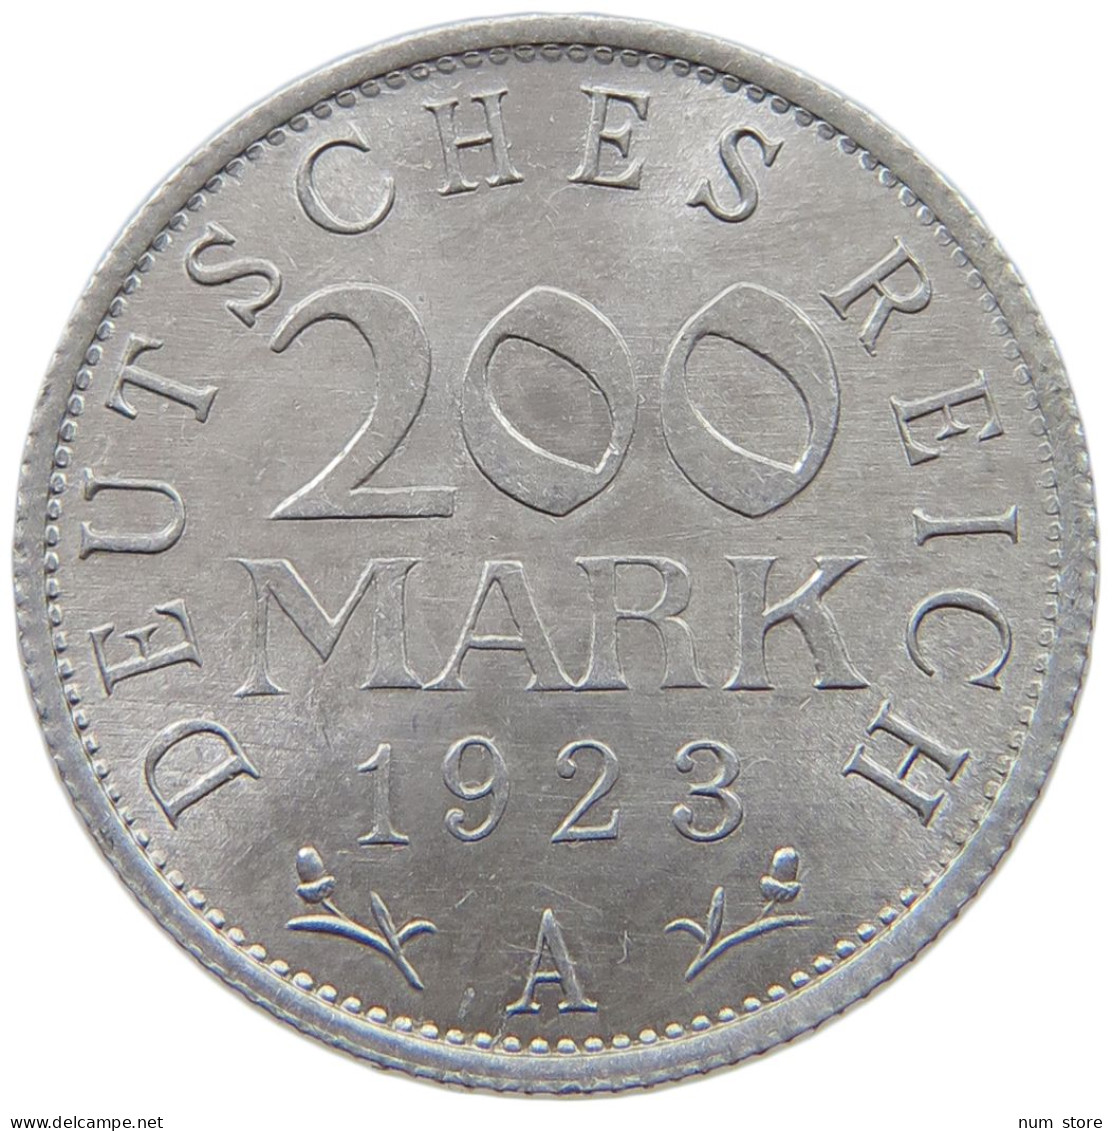 GERMANY WEIMAR 200 MARK 1923 A TOP #a021 0991 - 200 & 500 Mark